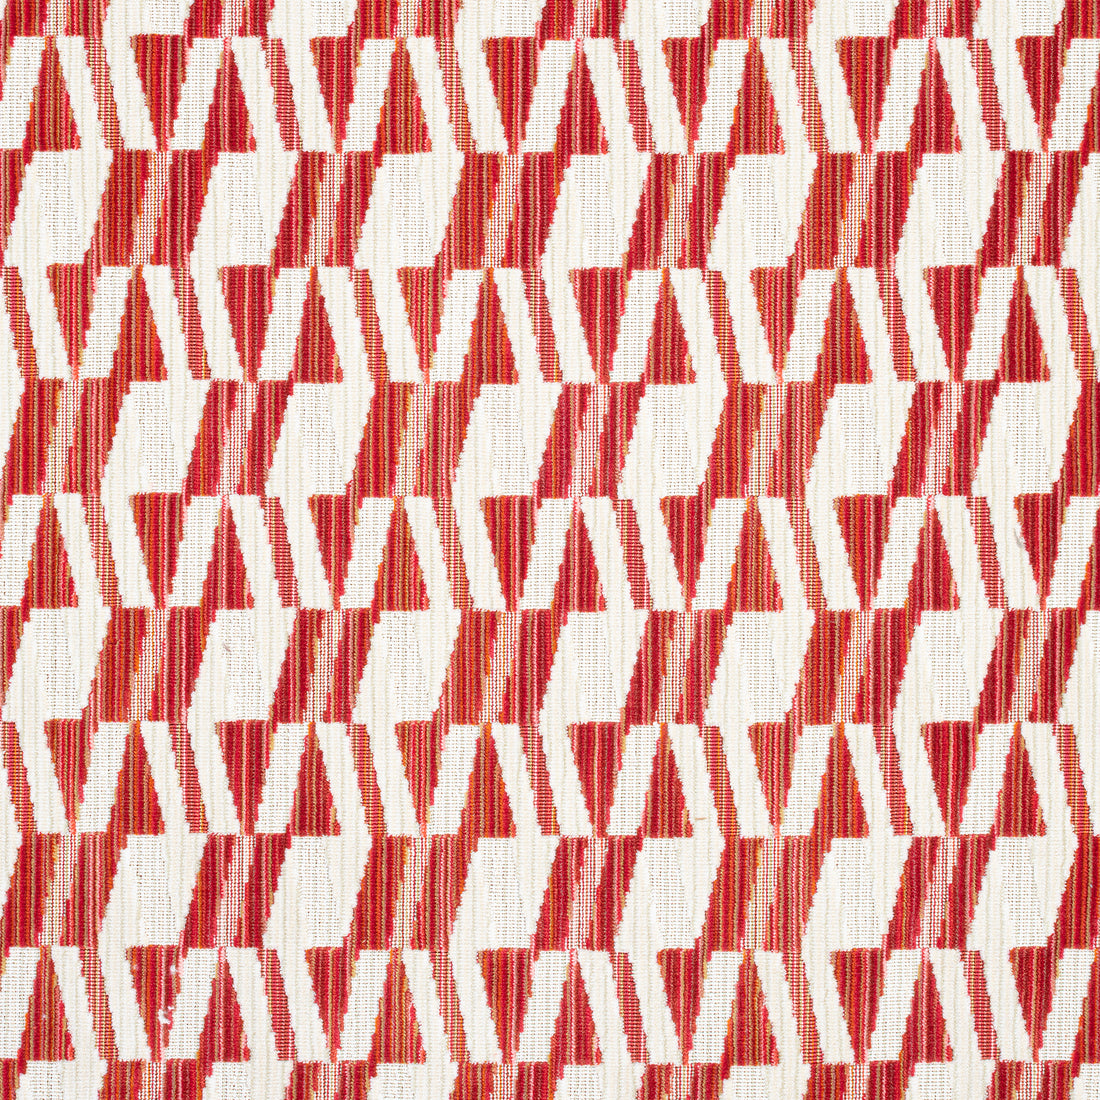 Bossa Nova Velvet fabric in persimmon color - pattern number W72808 - by Thibaut in the Woven Resource 13: Fusion Velvets collection